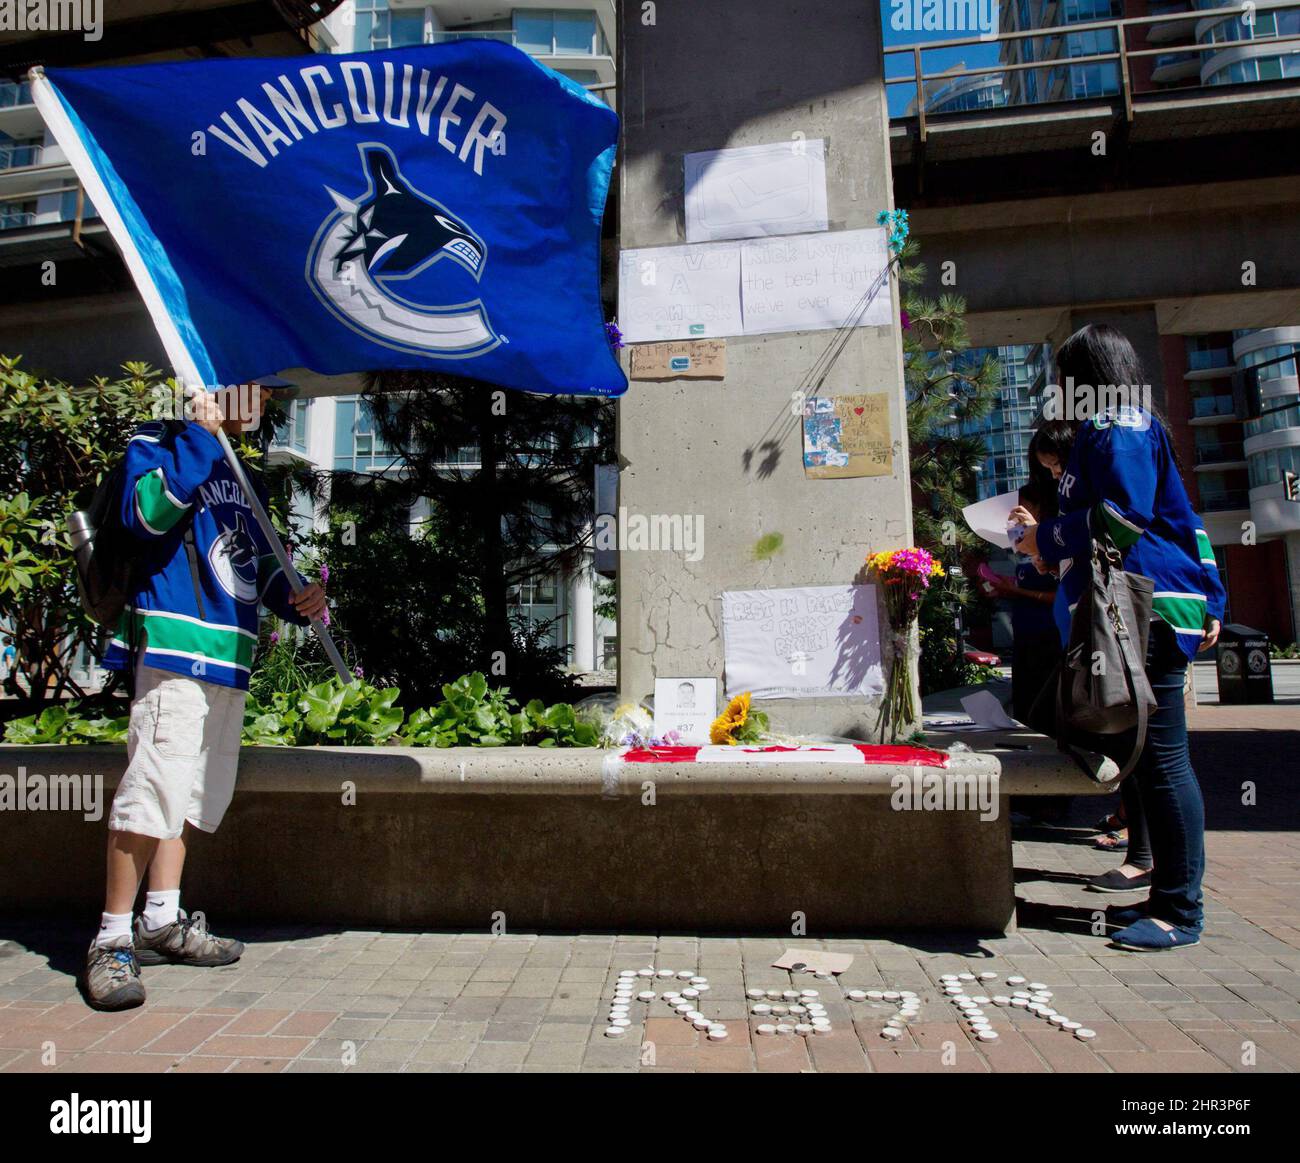 Calvin Ng, left, holds a Vancouver Canucks flag as Heidi Mak, right, pauses at a makeshift memorial for former Canucks hockey player Rick Rypien outside Rogers Arena in Vancouver, B.C., on Tuesday August 16, 2011. Rypien, who signed a one-year deal with the Winnipeg Jets in July, was found dead at his Alberta home on Monday. THE CANADIAN PRESS/Darryl Dyck Stock Photo